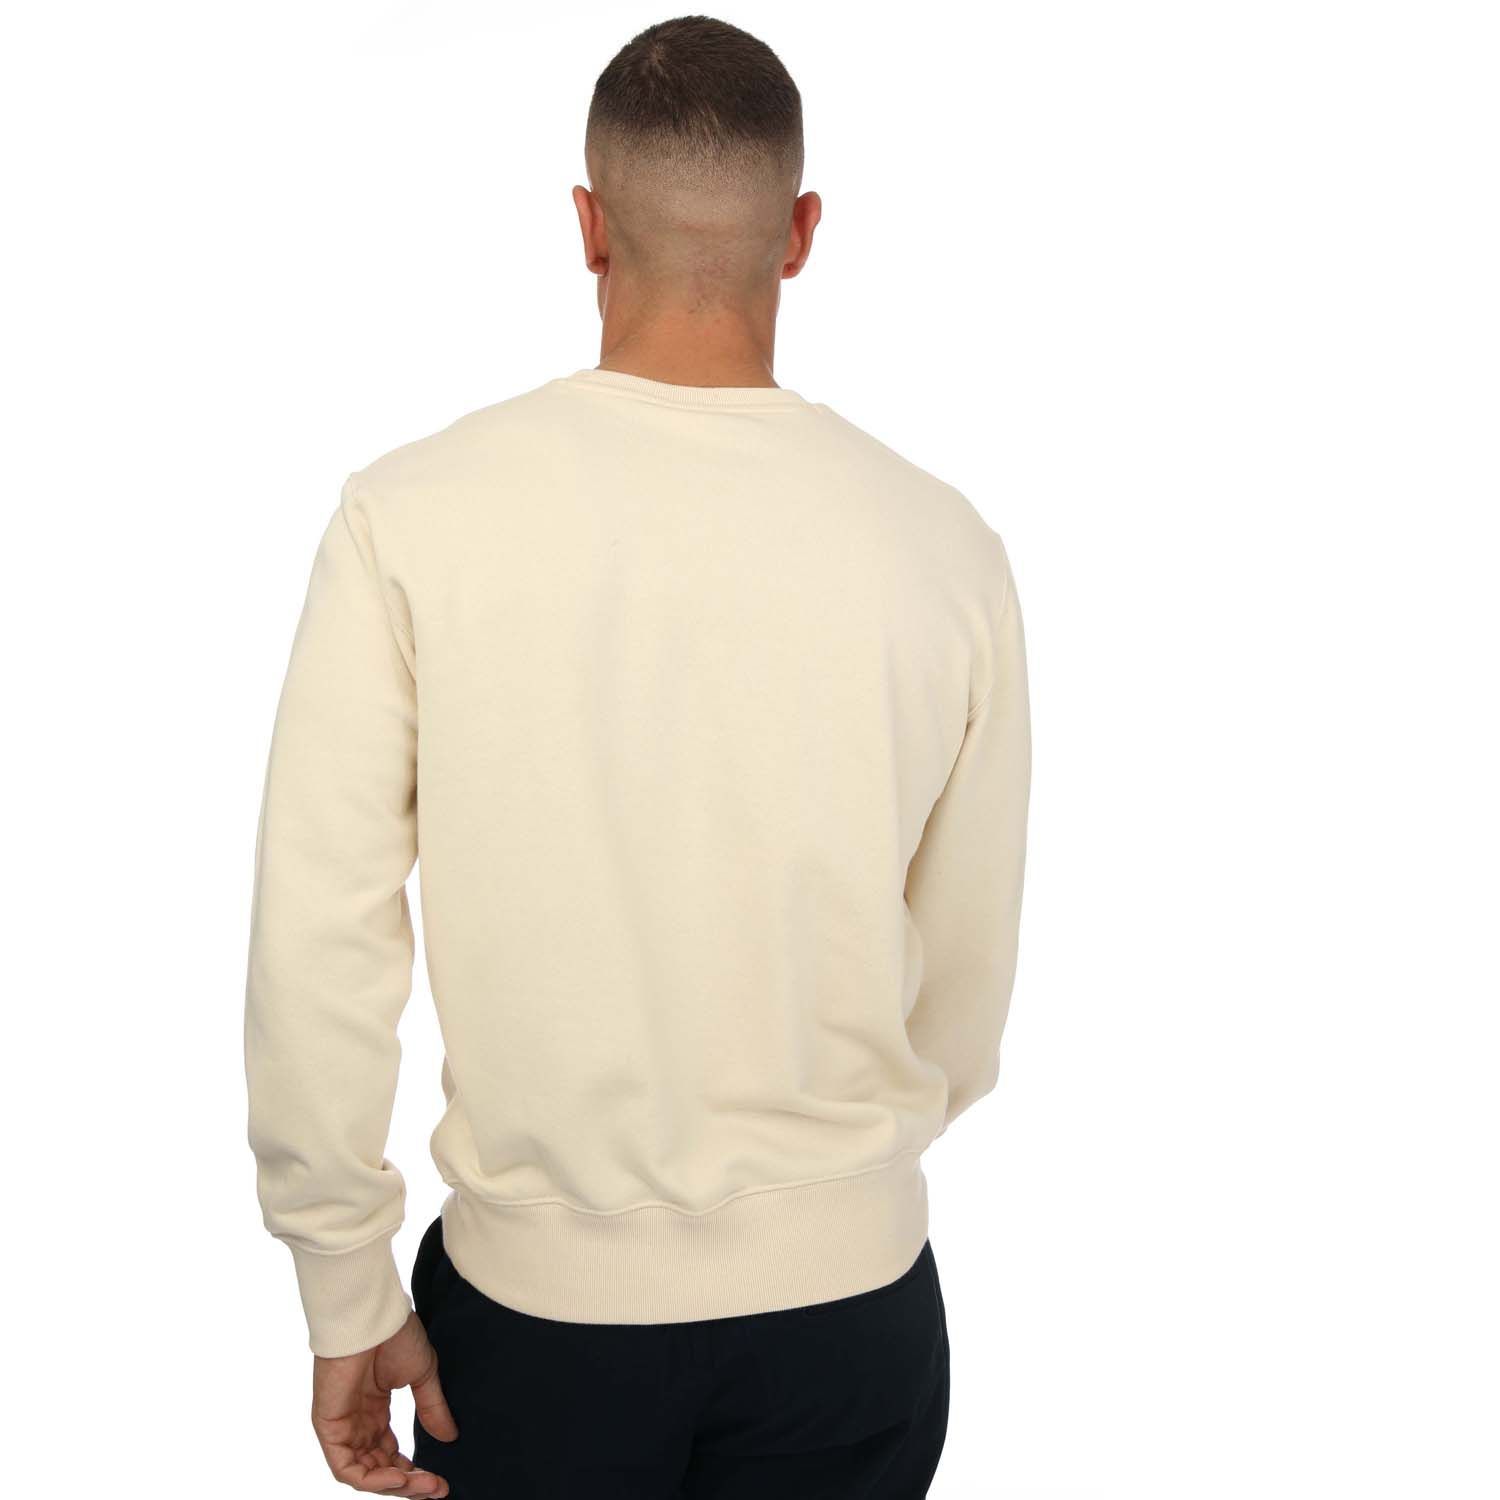 Mens Champion Crew Neck Small Script Logo Sweatshirt in sand.- Crewneck.- Ribbed elasticated waistband and cuffs.- Small script logo in tatami embroidery on chest.- C logo embroidery on left sleeve.- Comfort fit.- Body Fabric: 67% Cotton  33% Polyester. Inserts: 100% Cotton. Rib Trim: 98% Cotton  2% Elastane.- Ref: 217065YS015